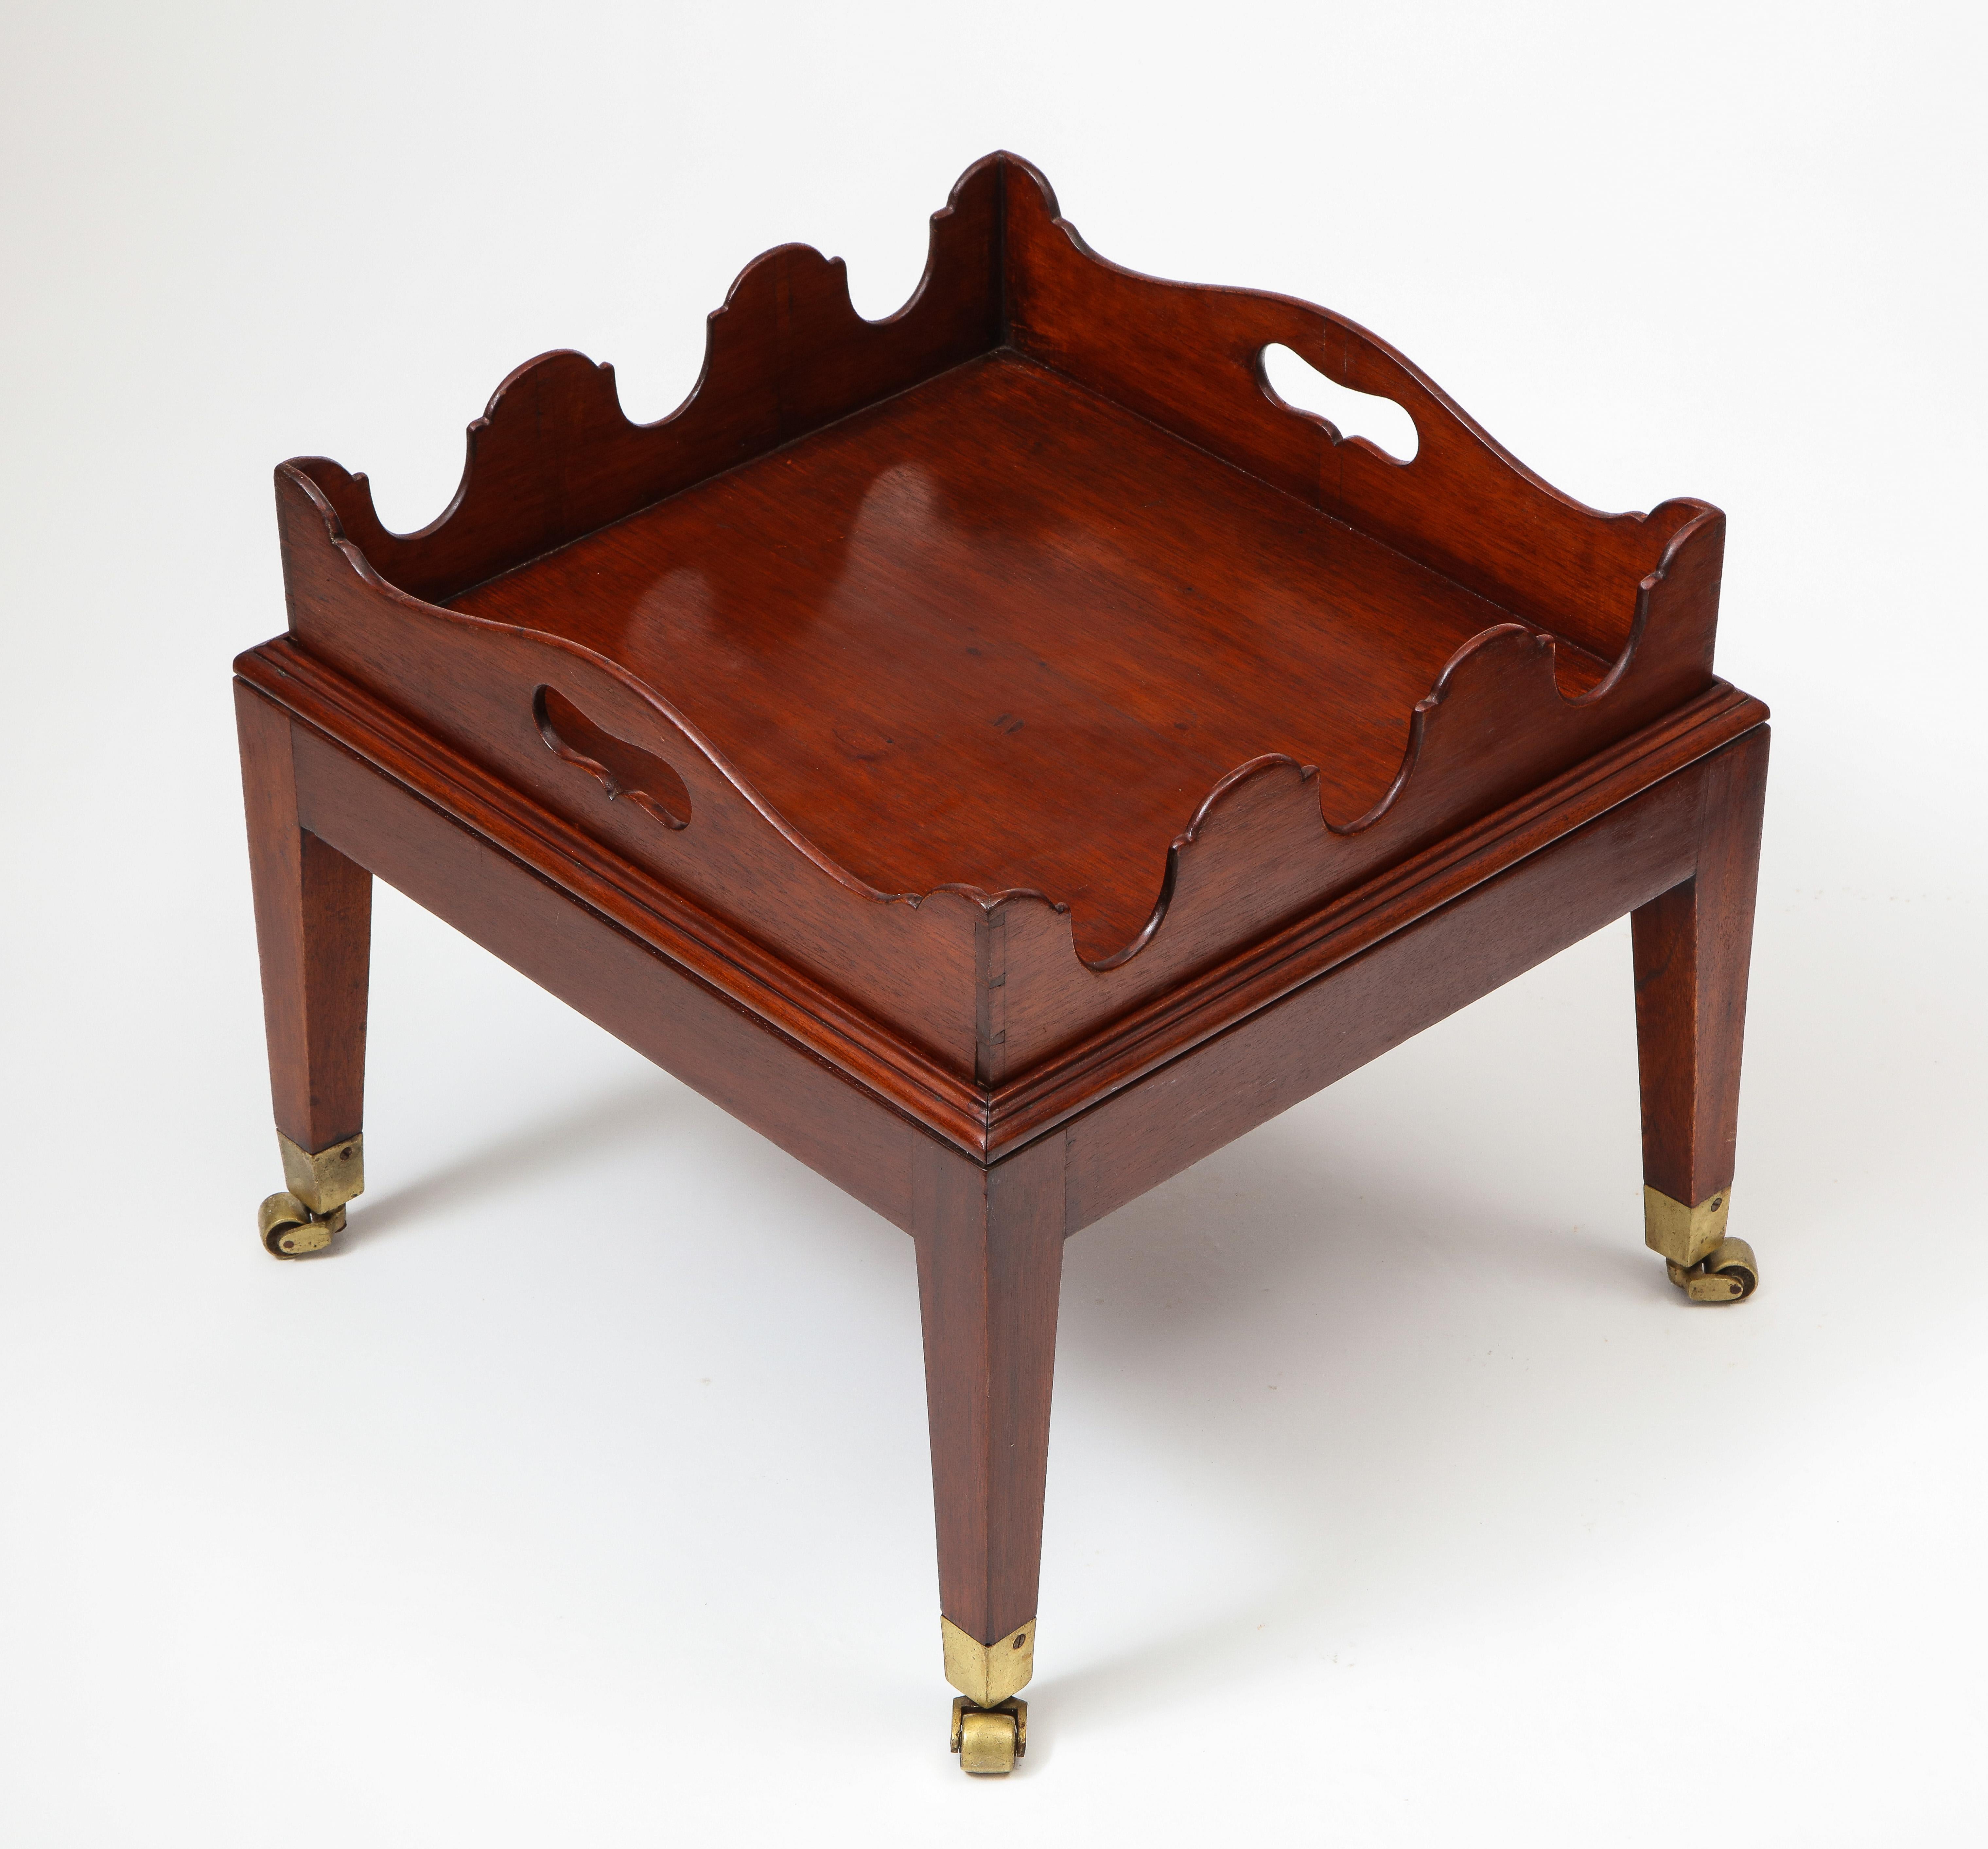 20th Century Small-Scale Georgian Style Mahogany Low Table